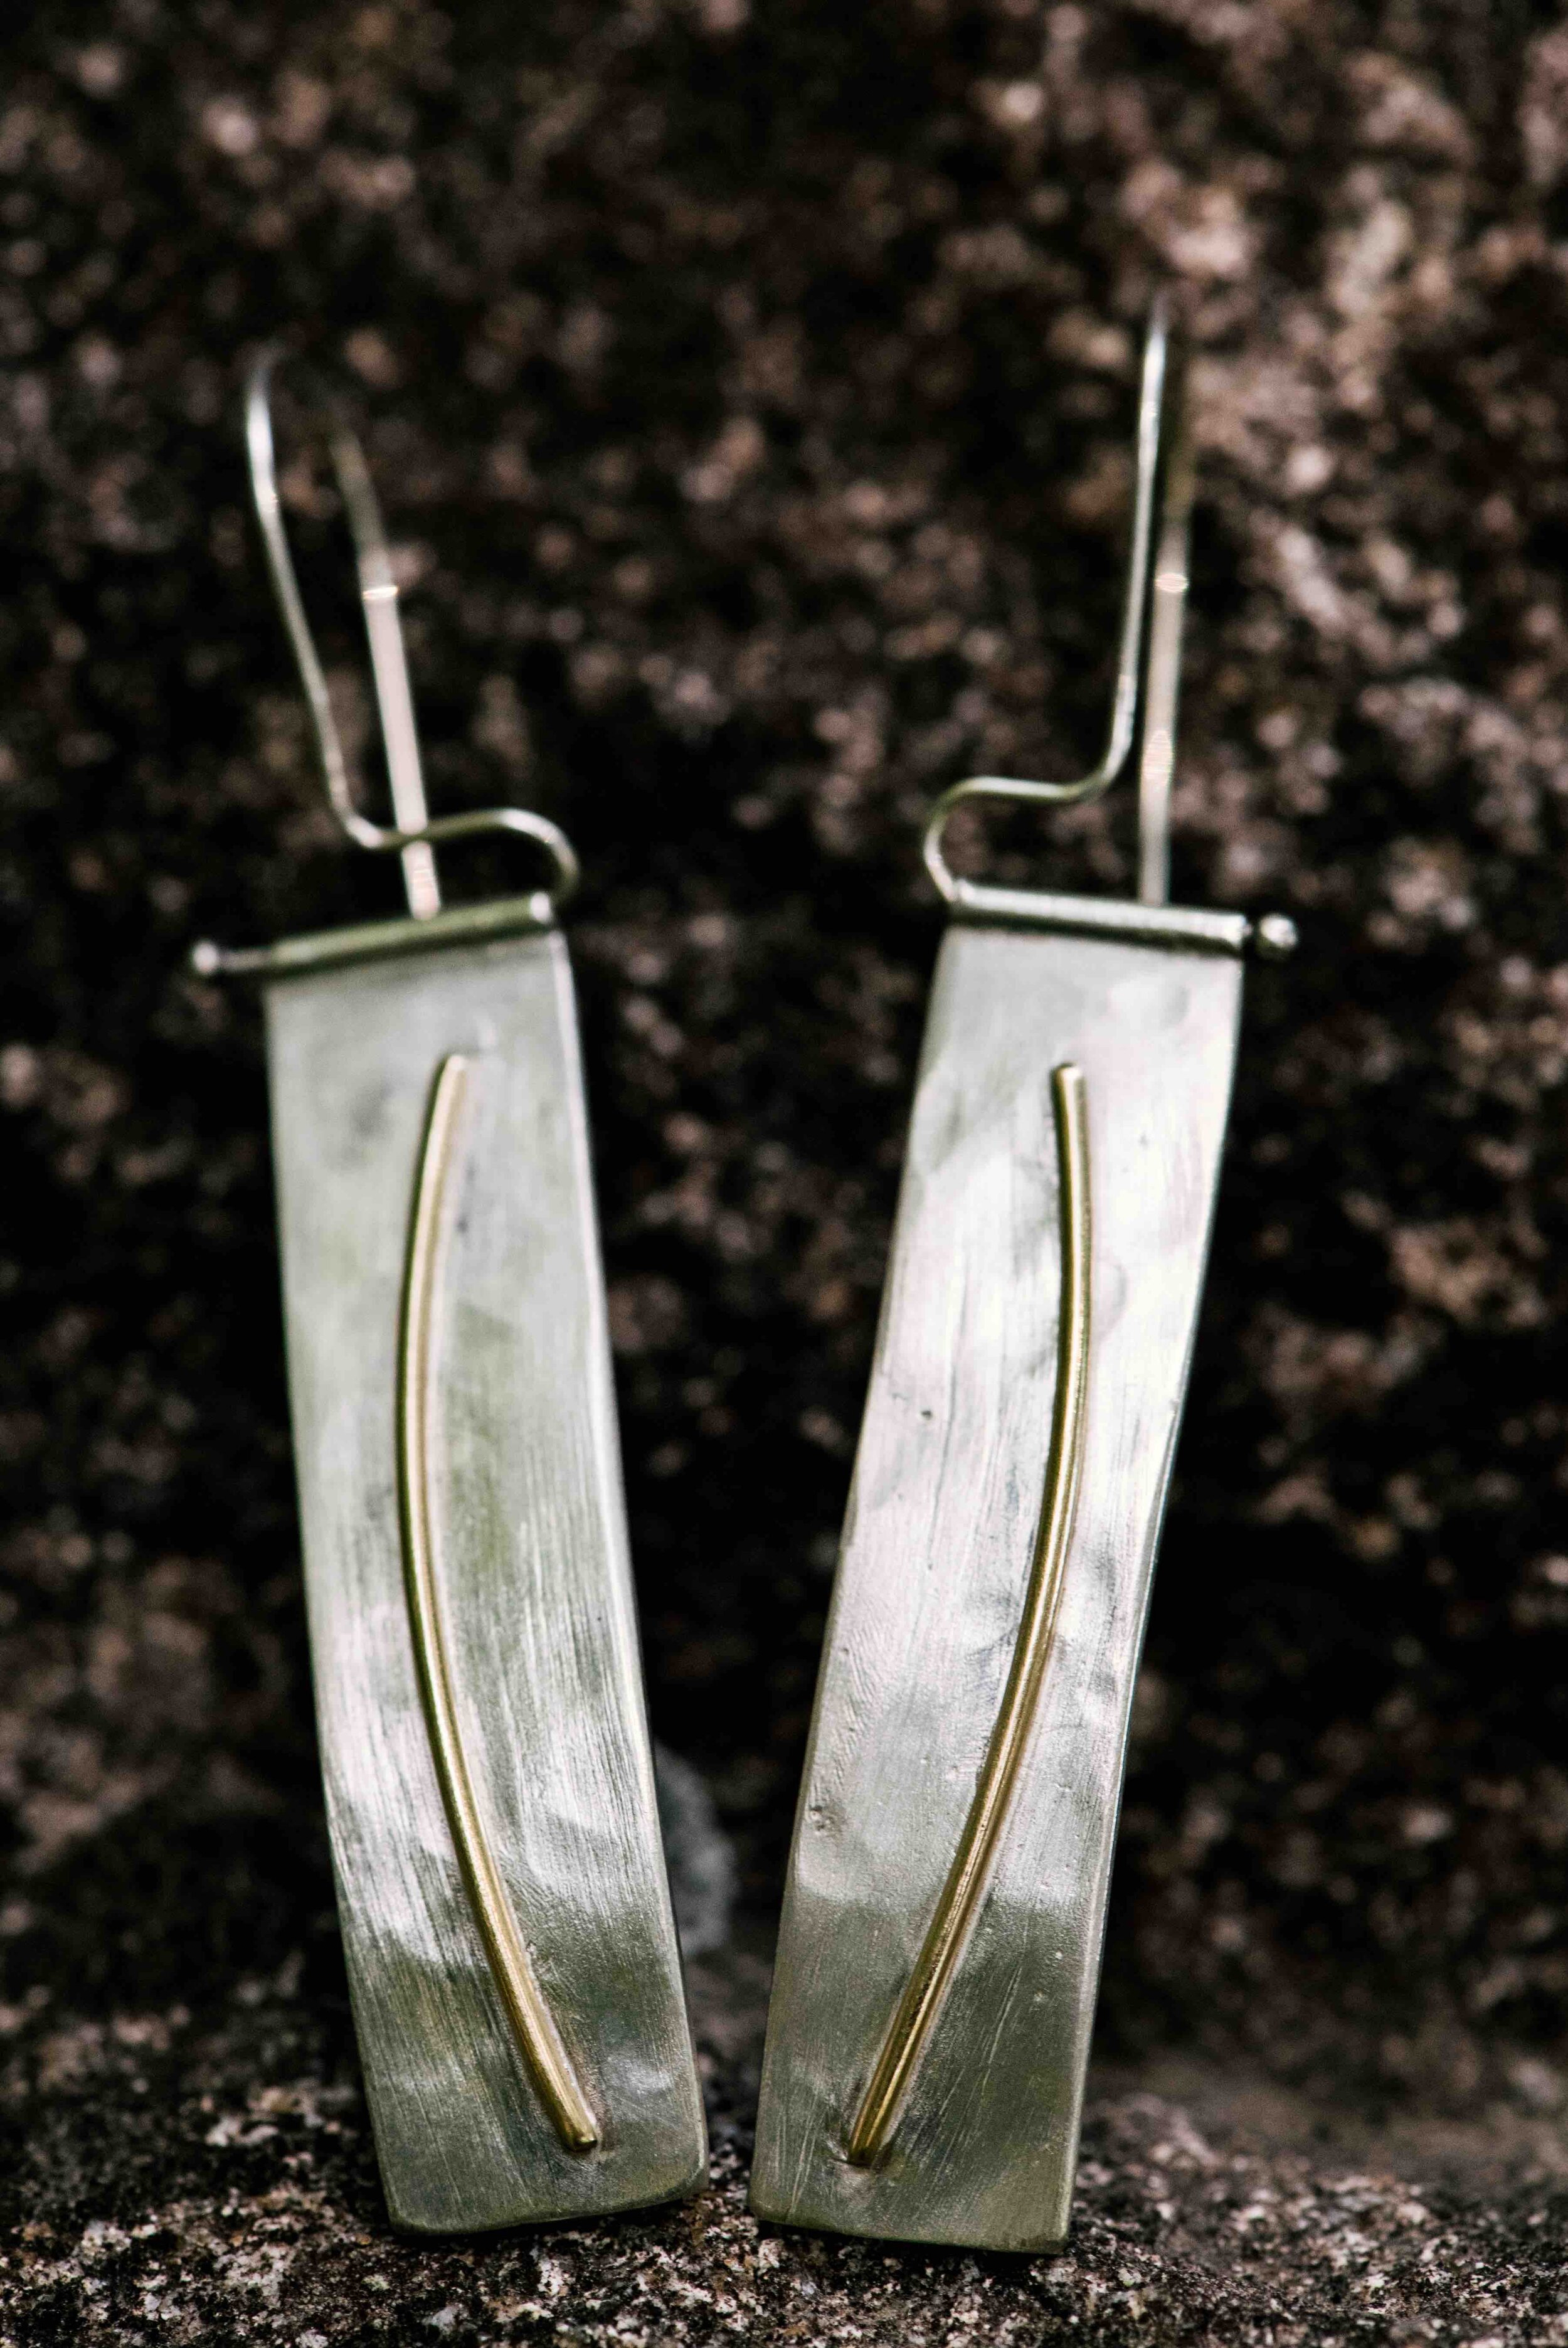  Laura Friedman’s textured jewelry is simultaneously modern and rustic. 